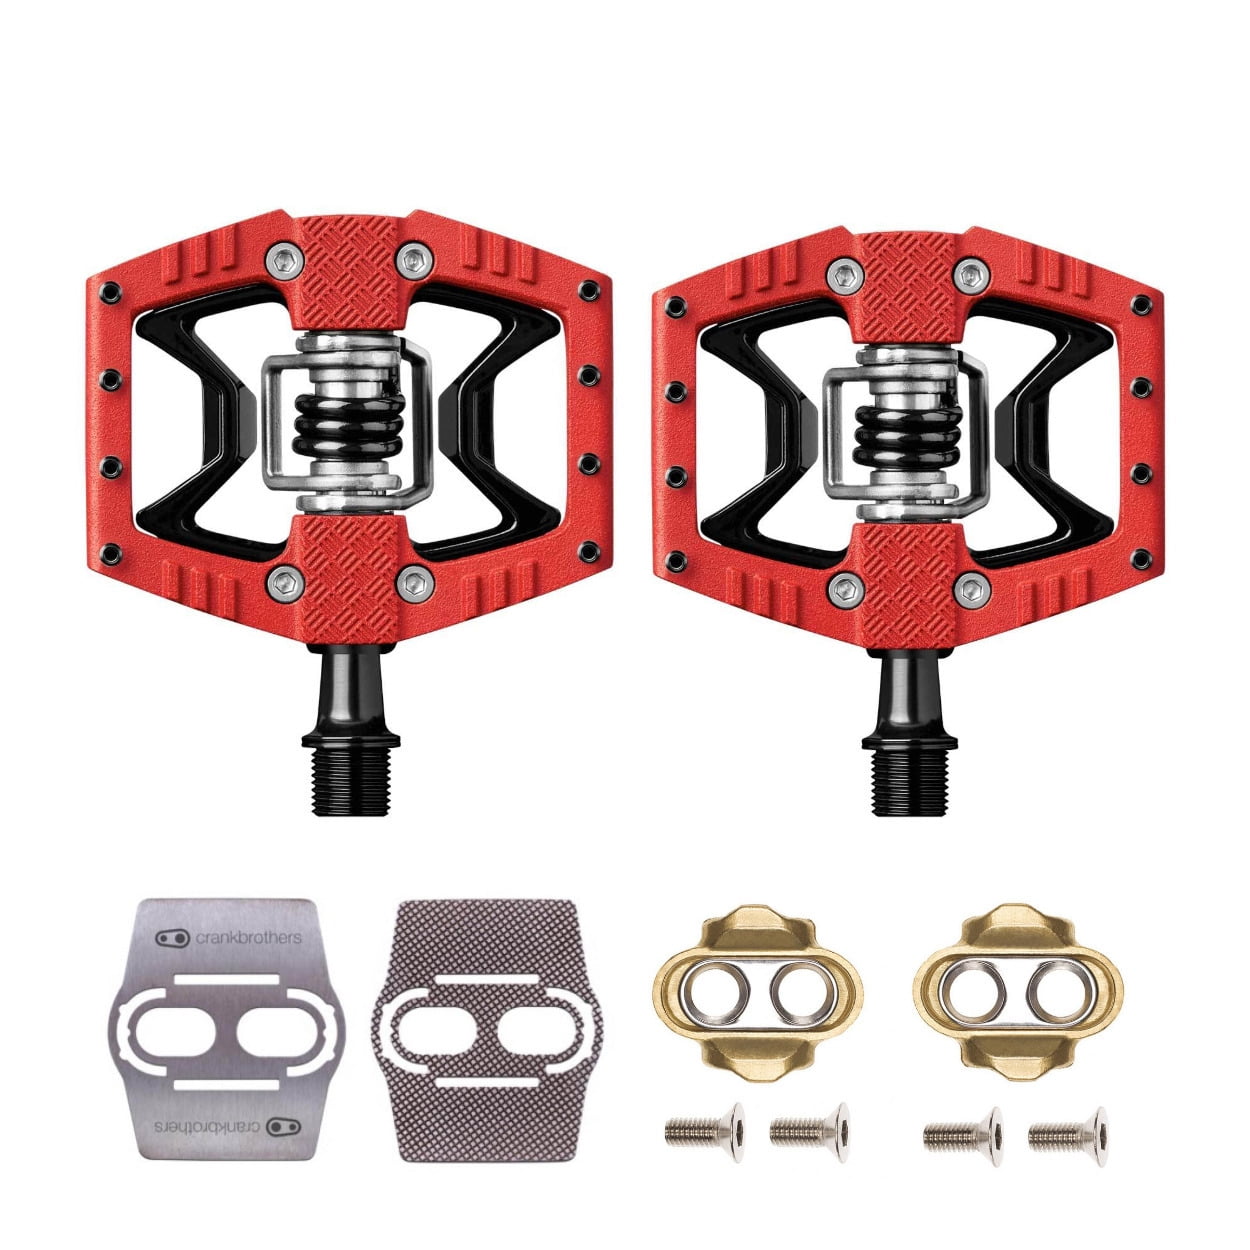 Crankbrothers Double Shot 3 Bike Pedals (Red/Black) with and Shoe Shields - Walmart.com